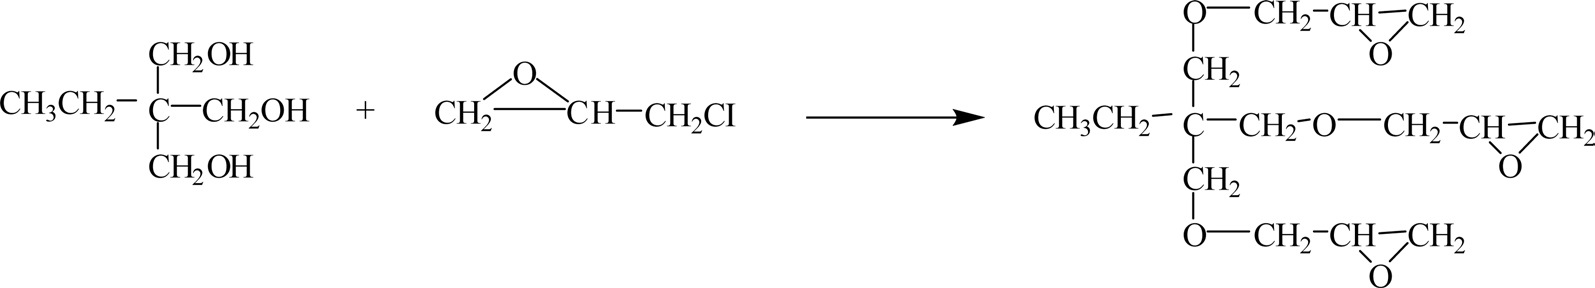 Schematic outline for the synthesis of trimethylol propane-N-triglycidyl ether.